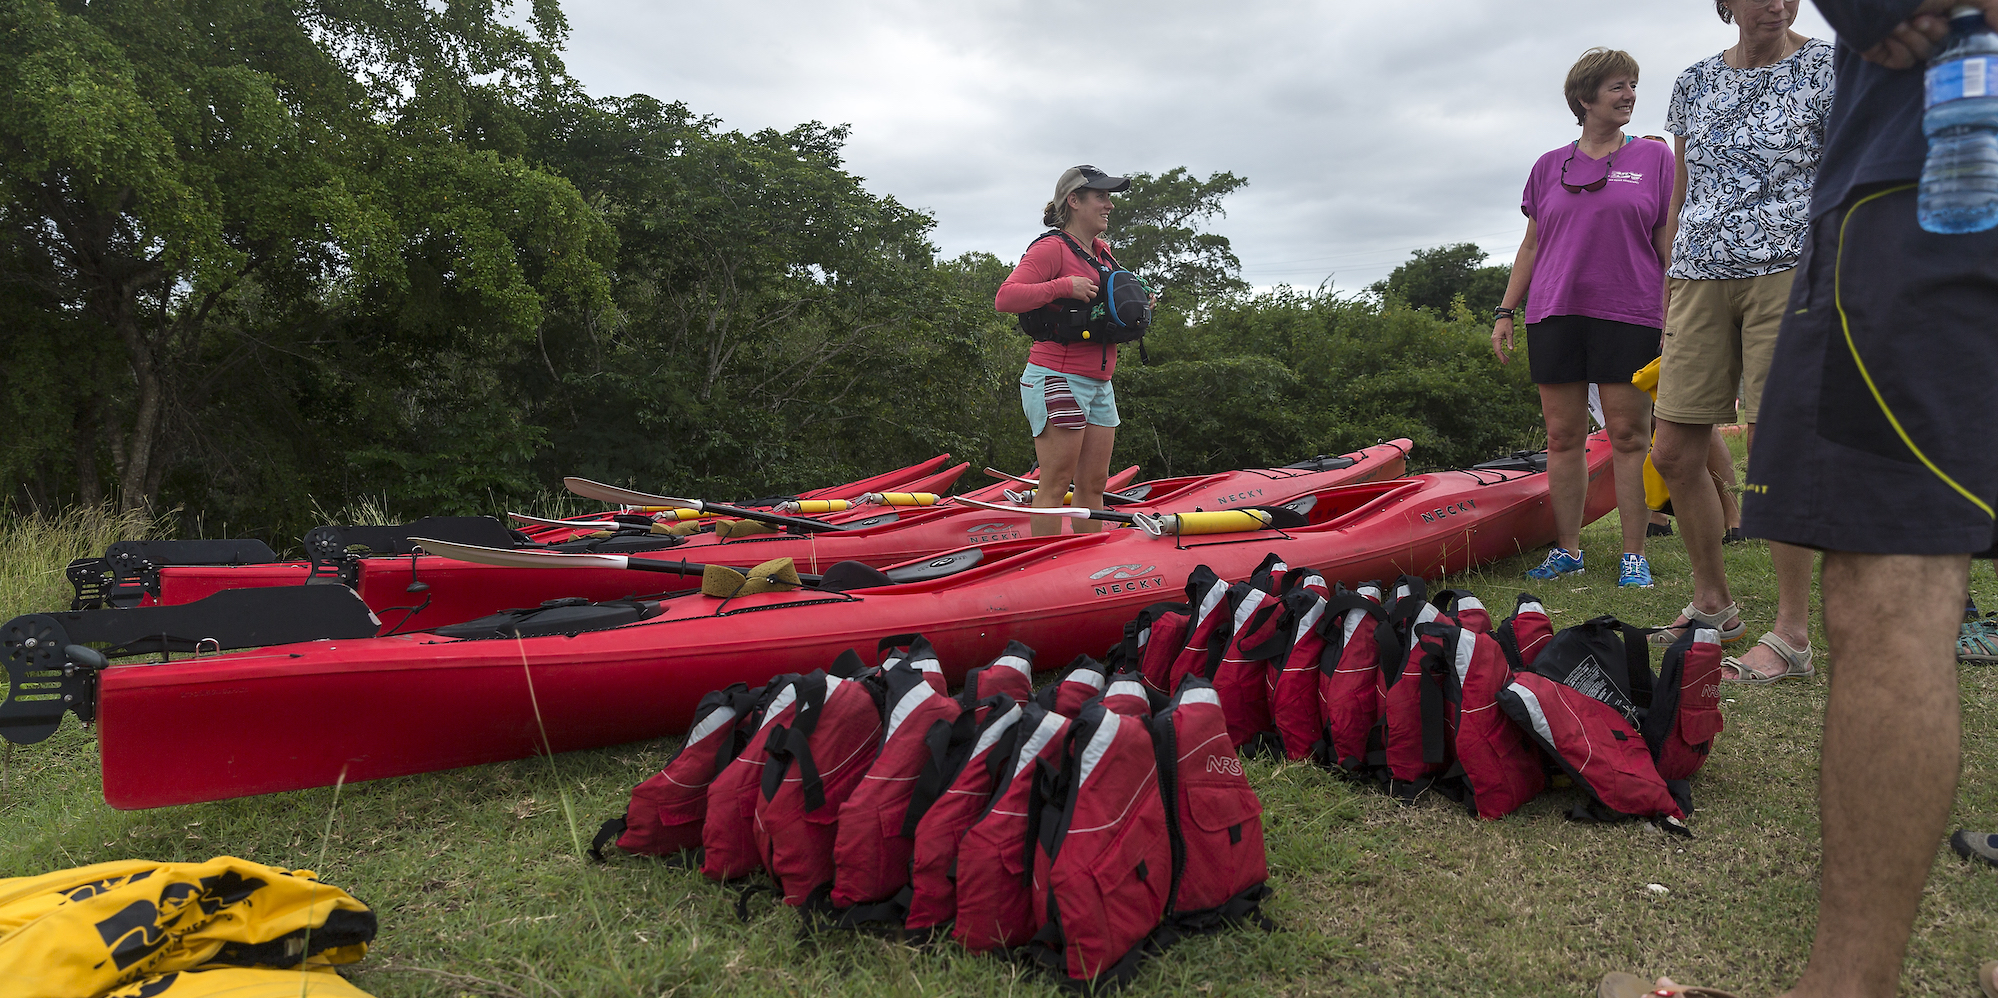 A line of shared PFDs in Cuba beside red sea kayaks ready to be distributed